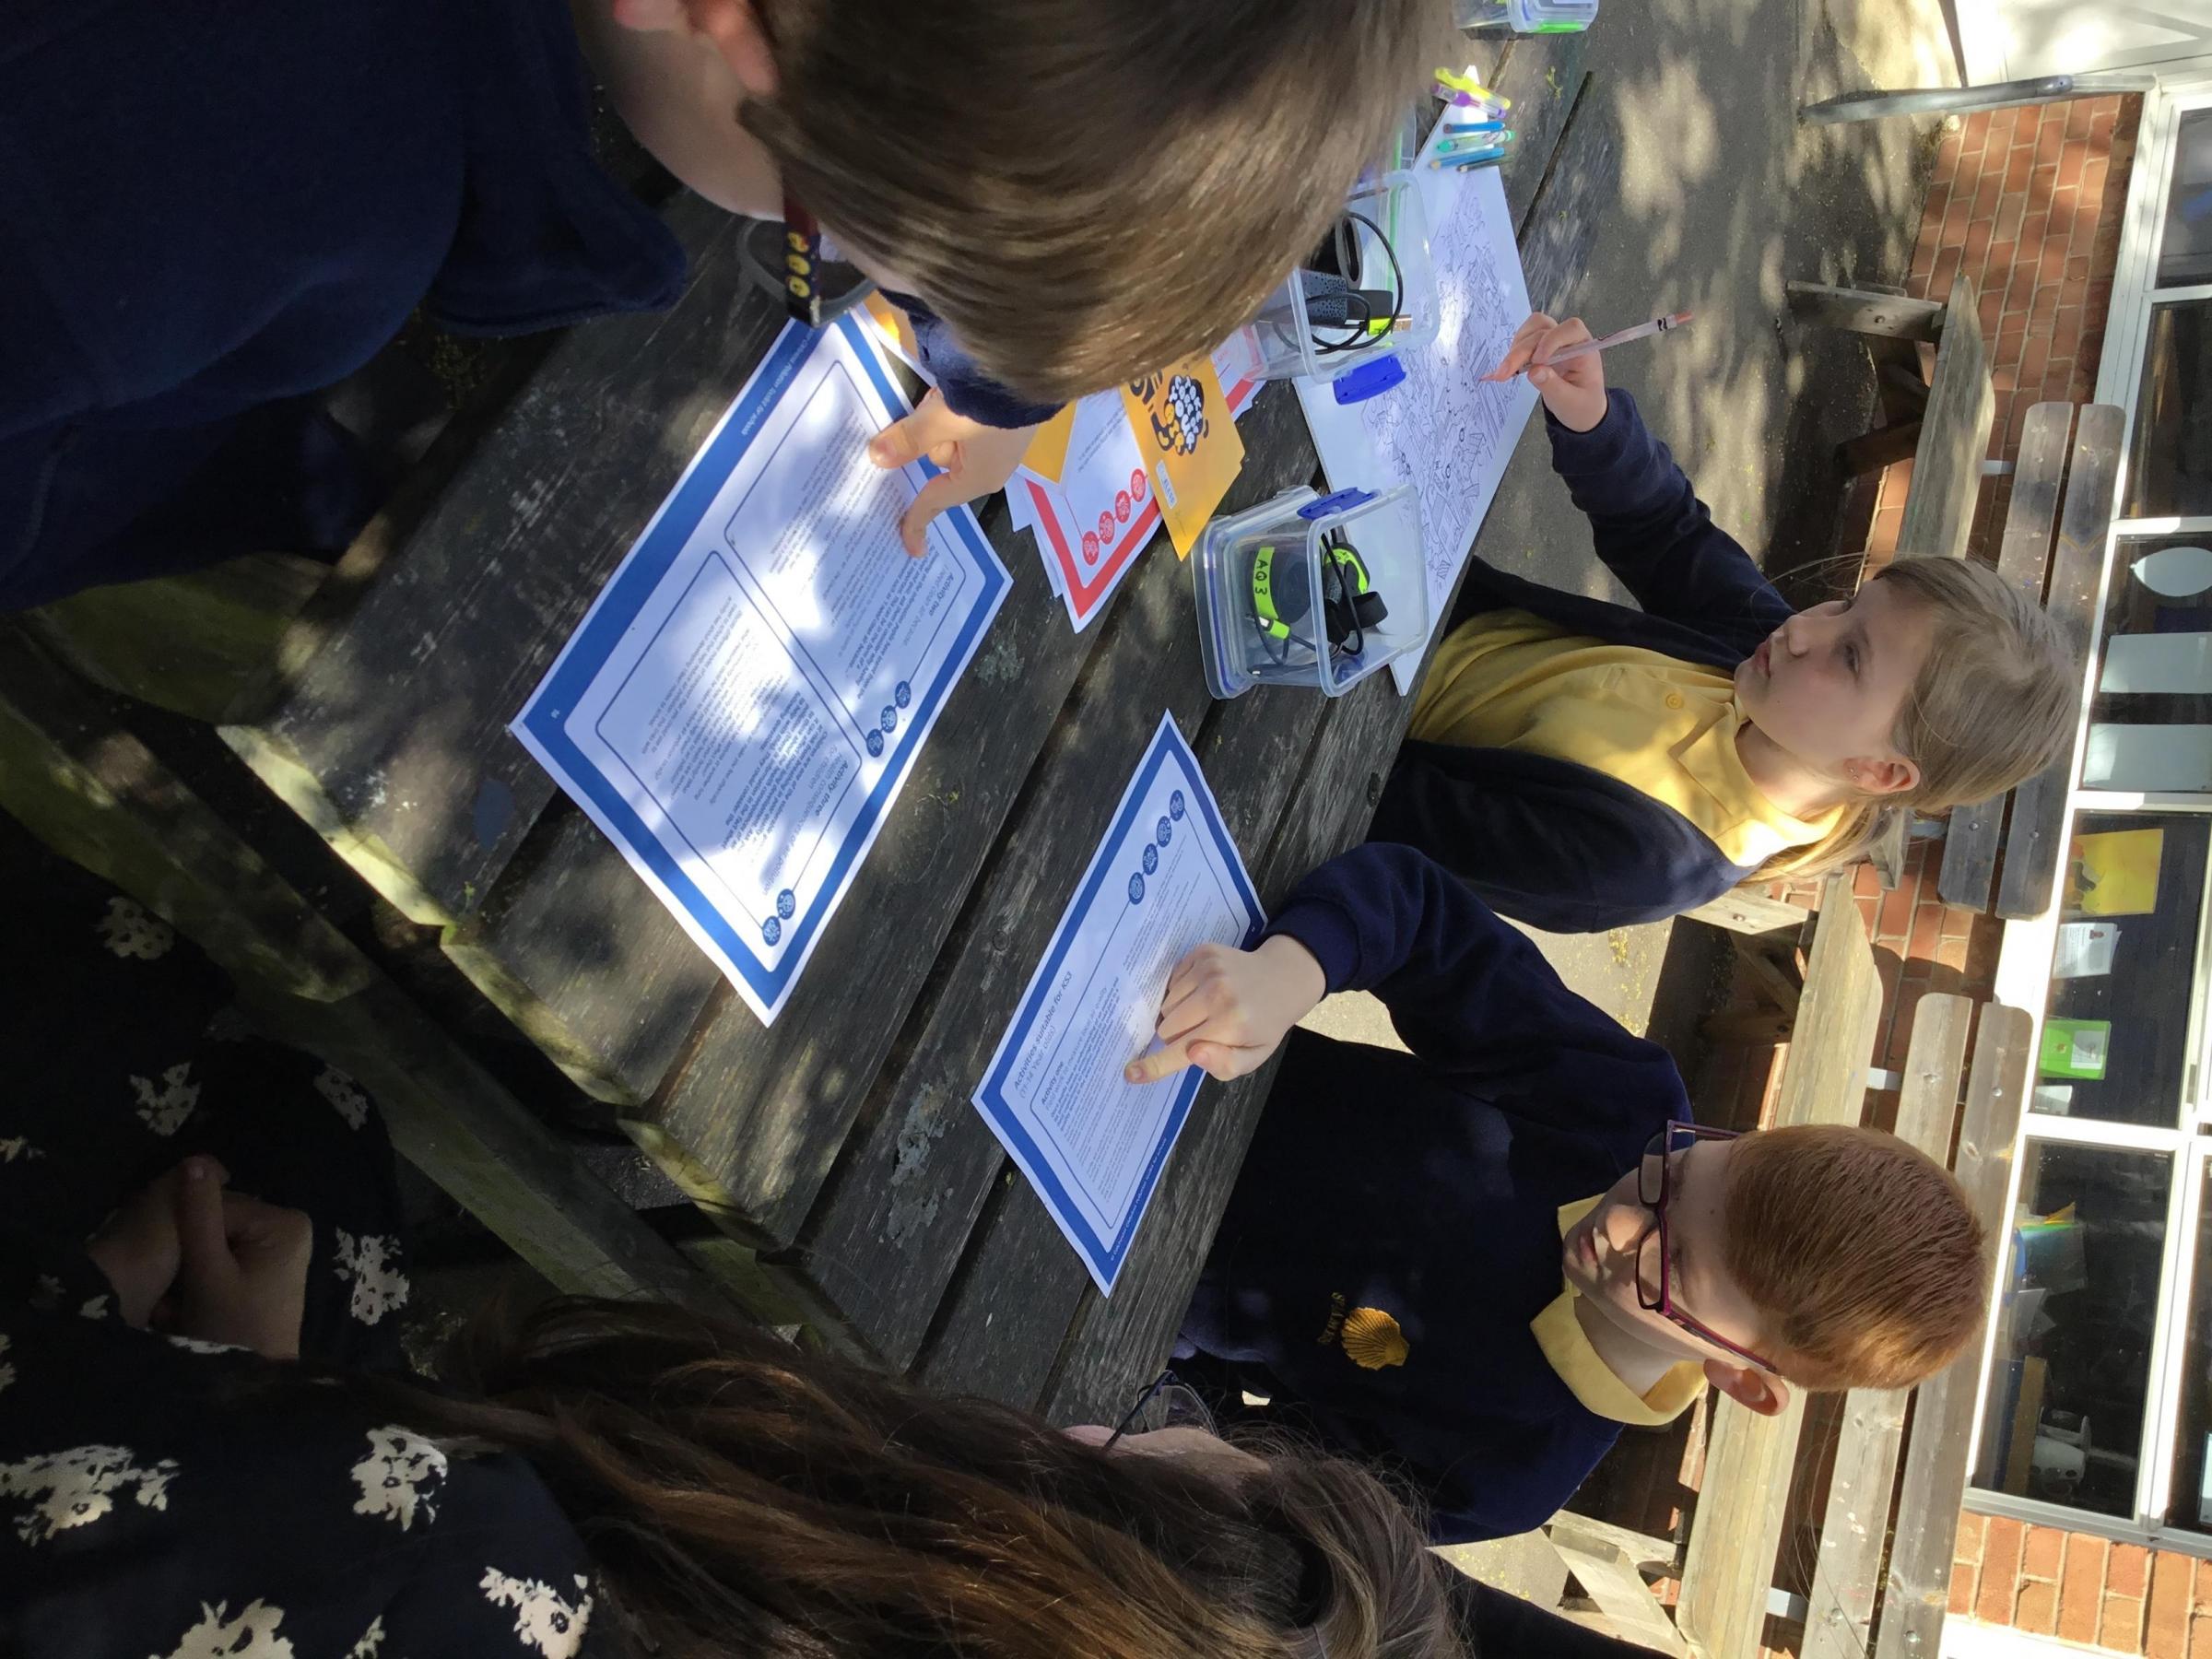 Pollution - St James Primary School pupils get to grips with the toolkit